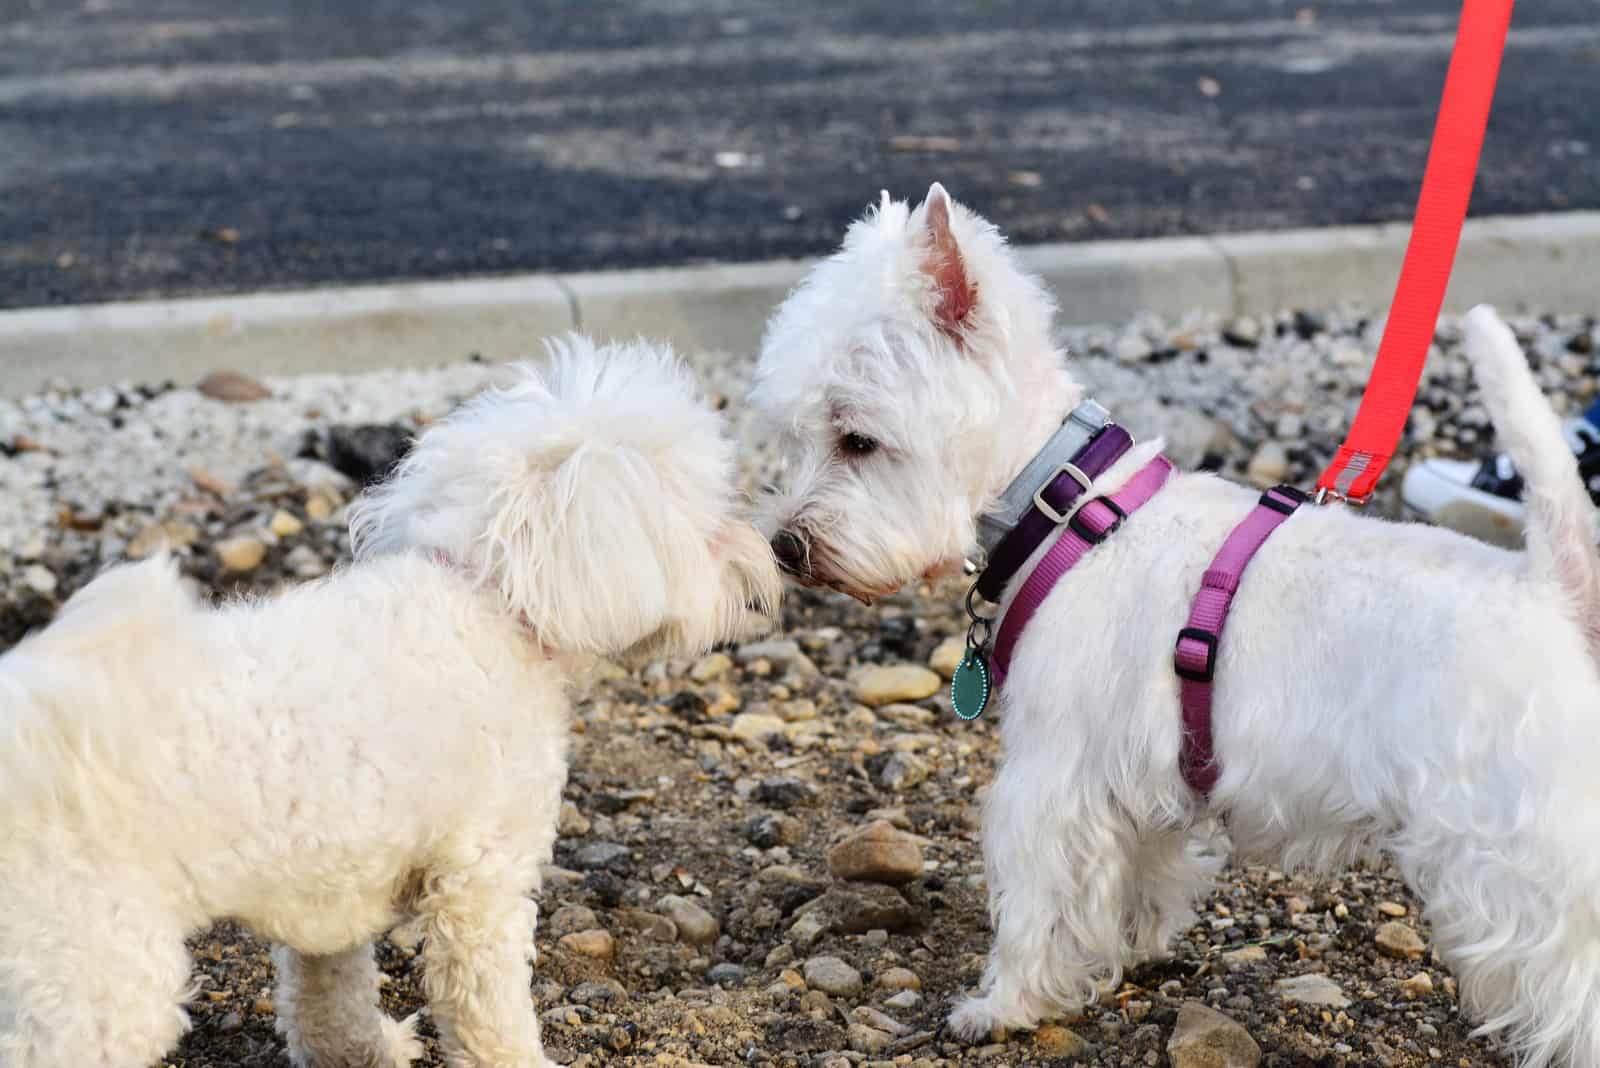 Westie and Bichon Frise sniff each other